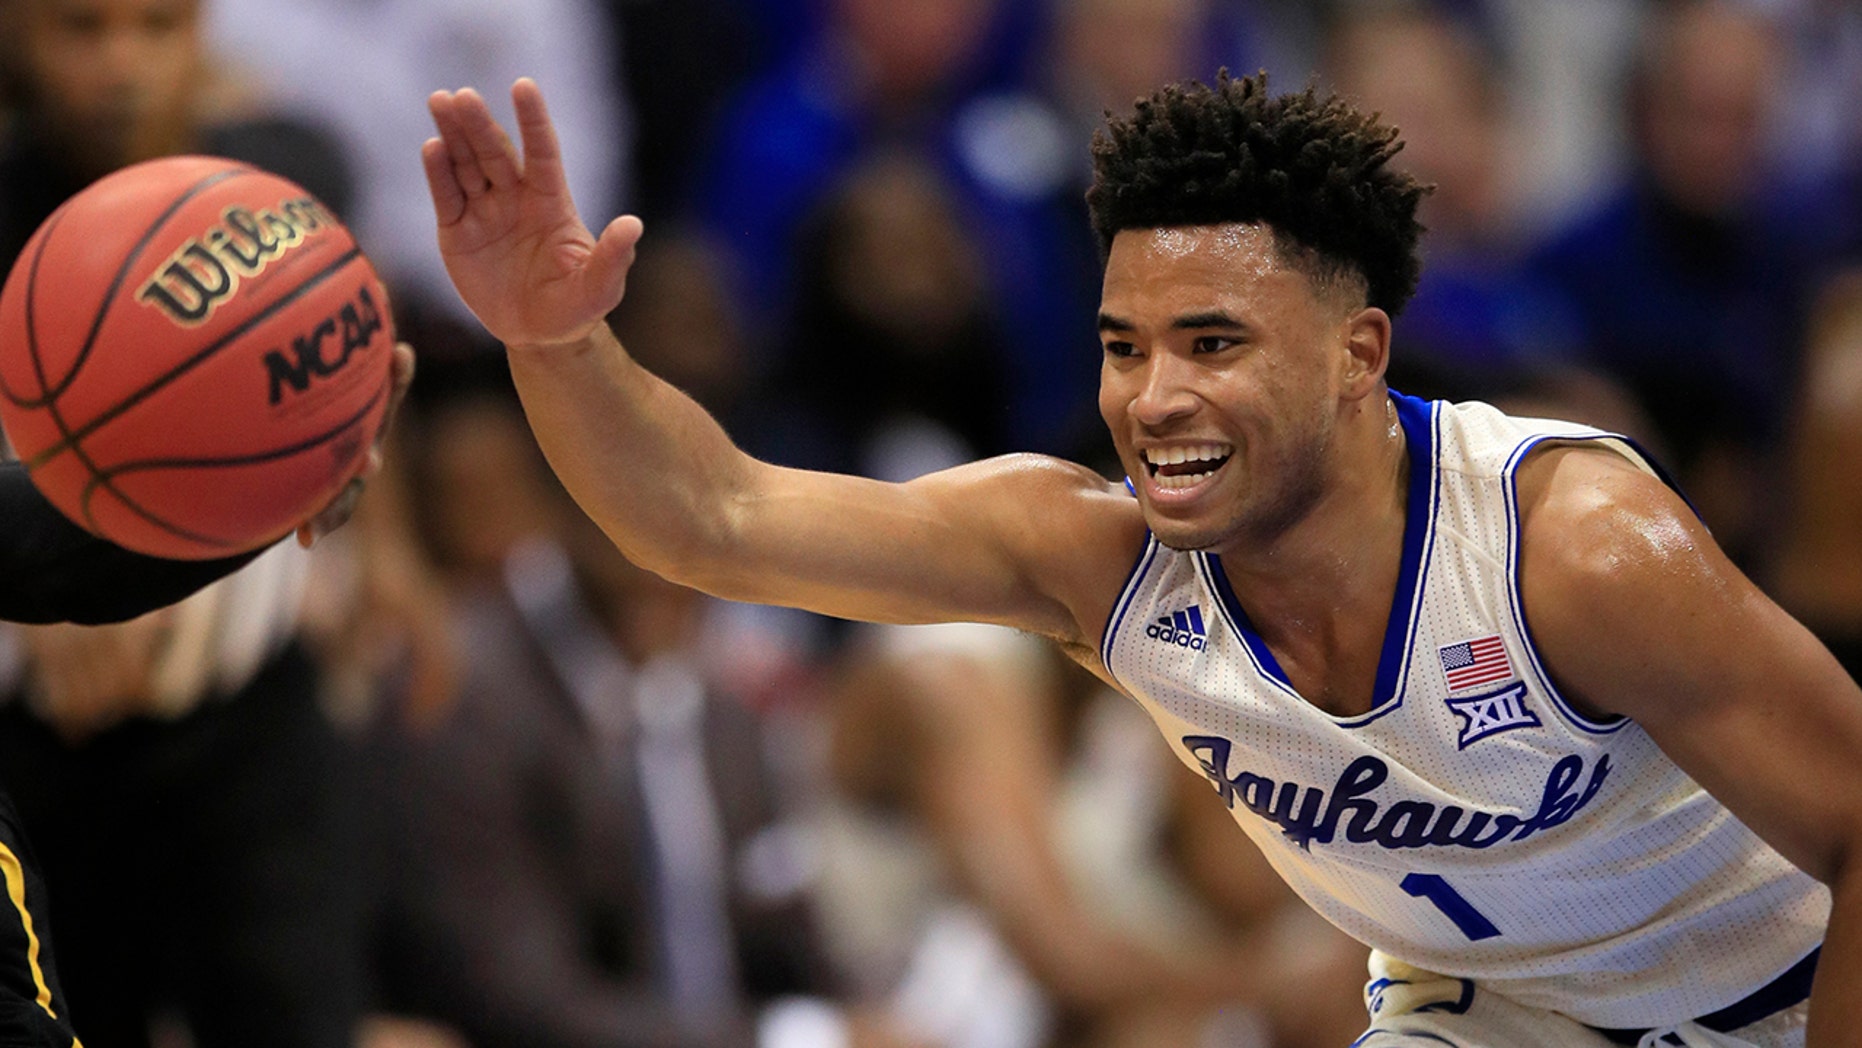 Kansas guard Devon Dotson (1) reaches for a loose ball during the first half of an NCAA college basketball game against Milwaukee in Lawrence, Kan., Tuesday, Dec. 10, 2019. (AP Photo/Orlin Wagner)